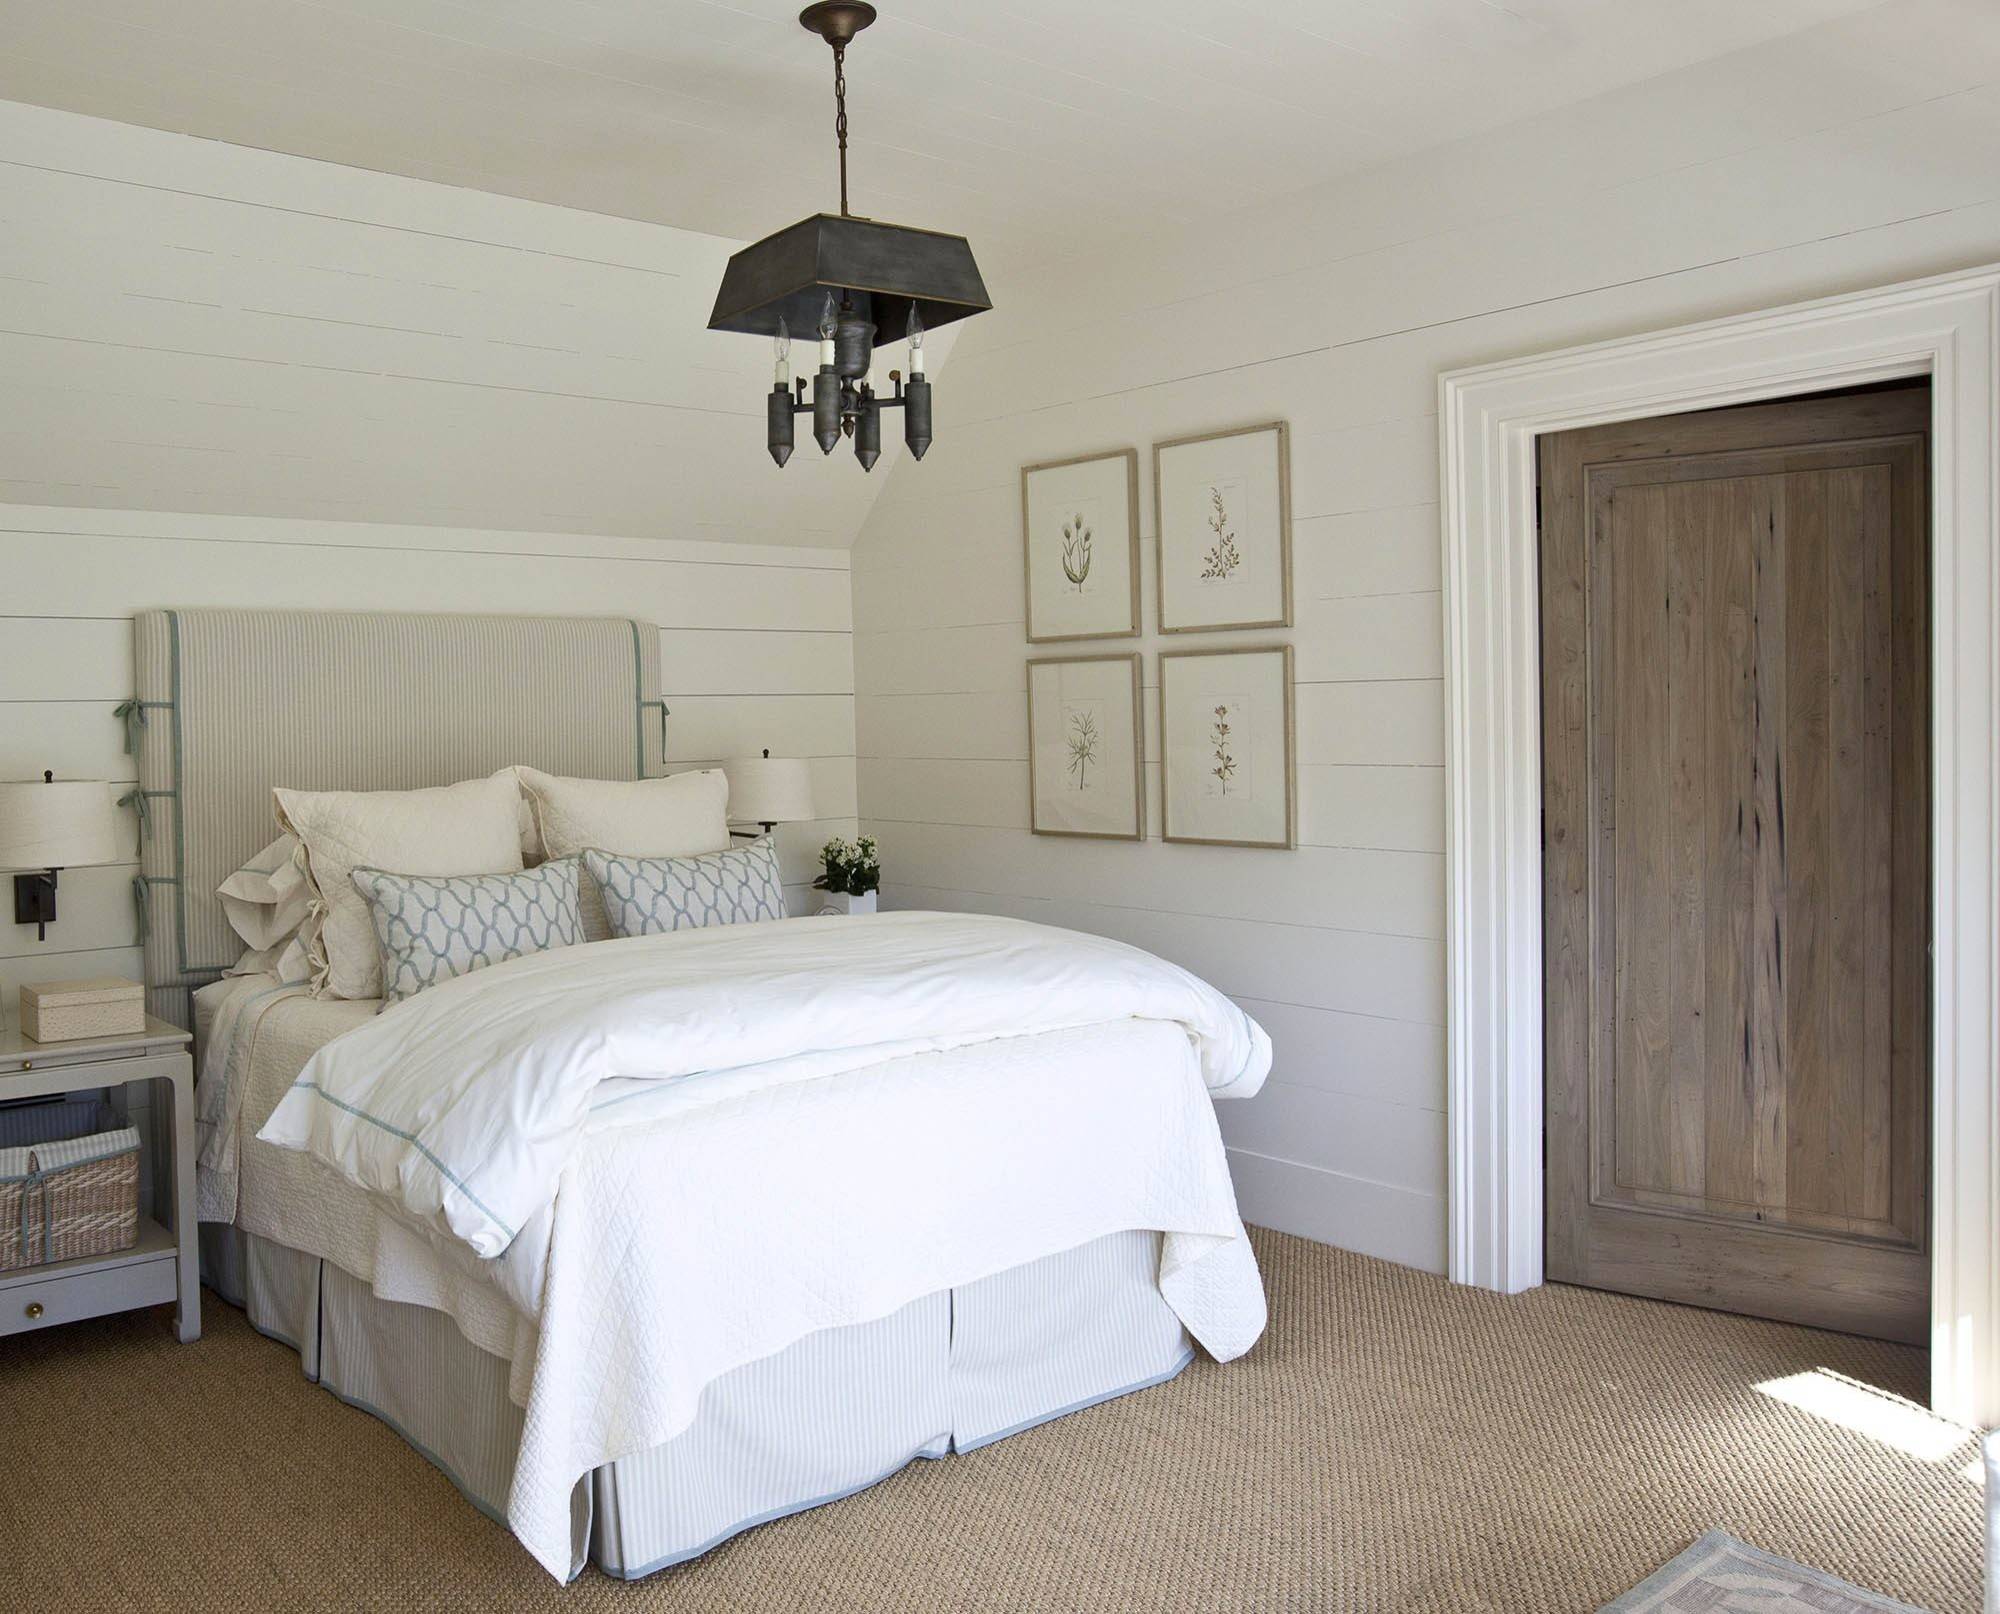 Cozy and simple modern bedroom featured in home tour